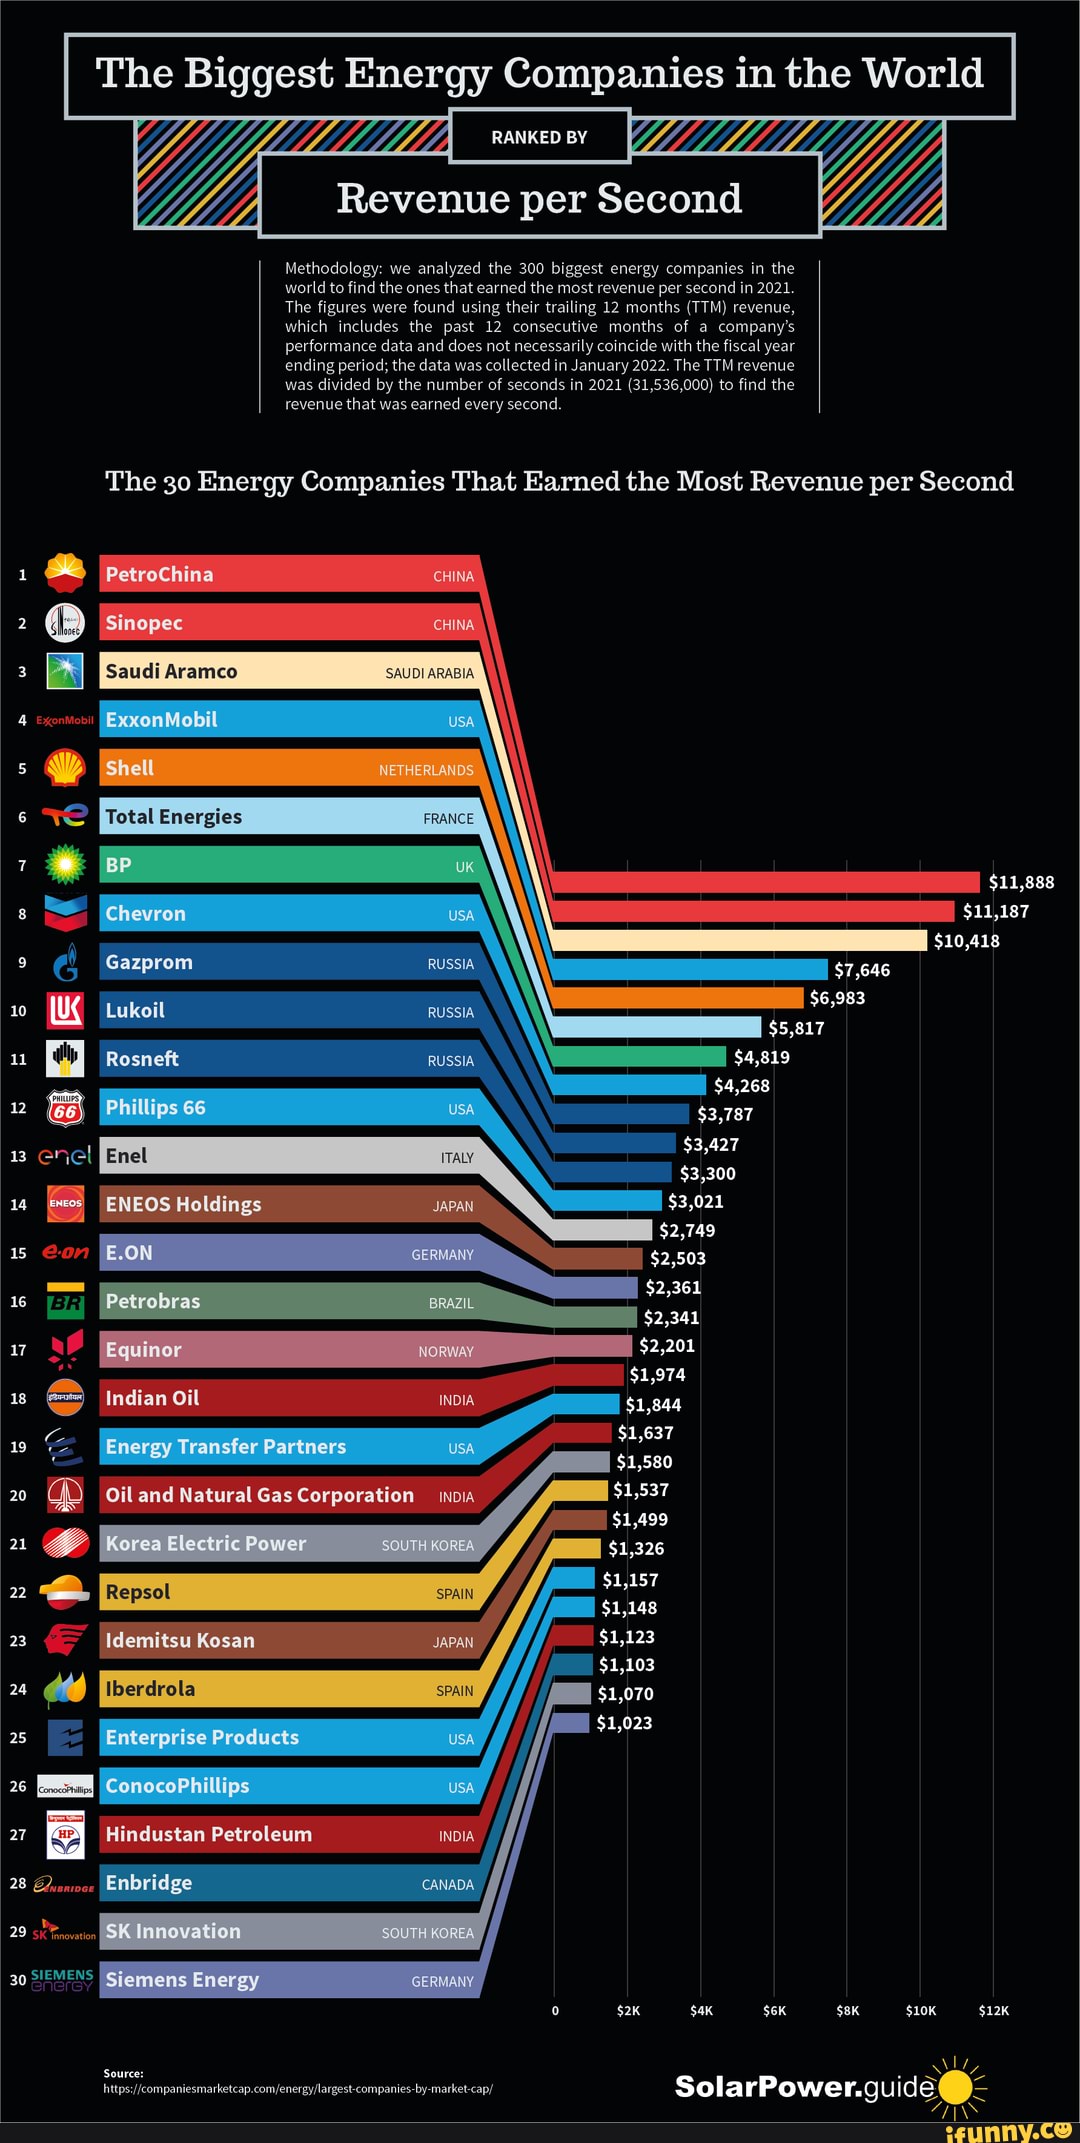 the-biggest-energy-companies-in-the-world-ranked-by-revenue-per-second